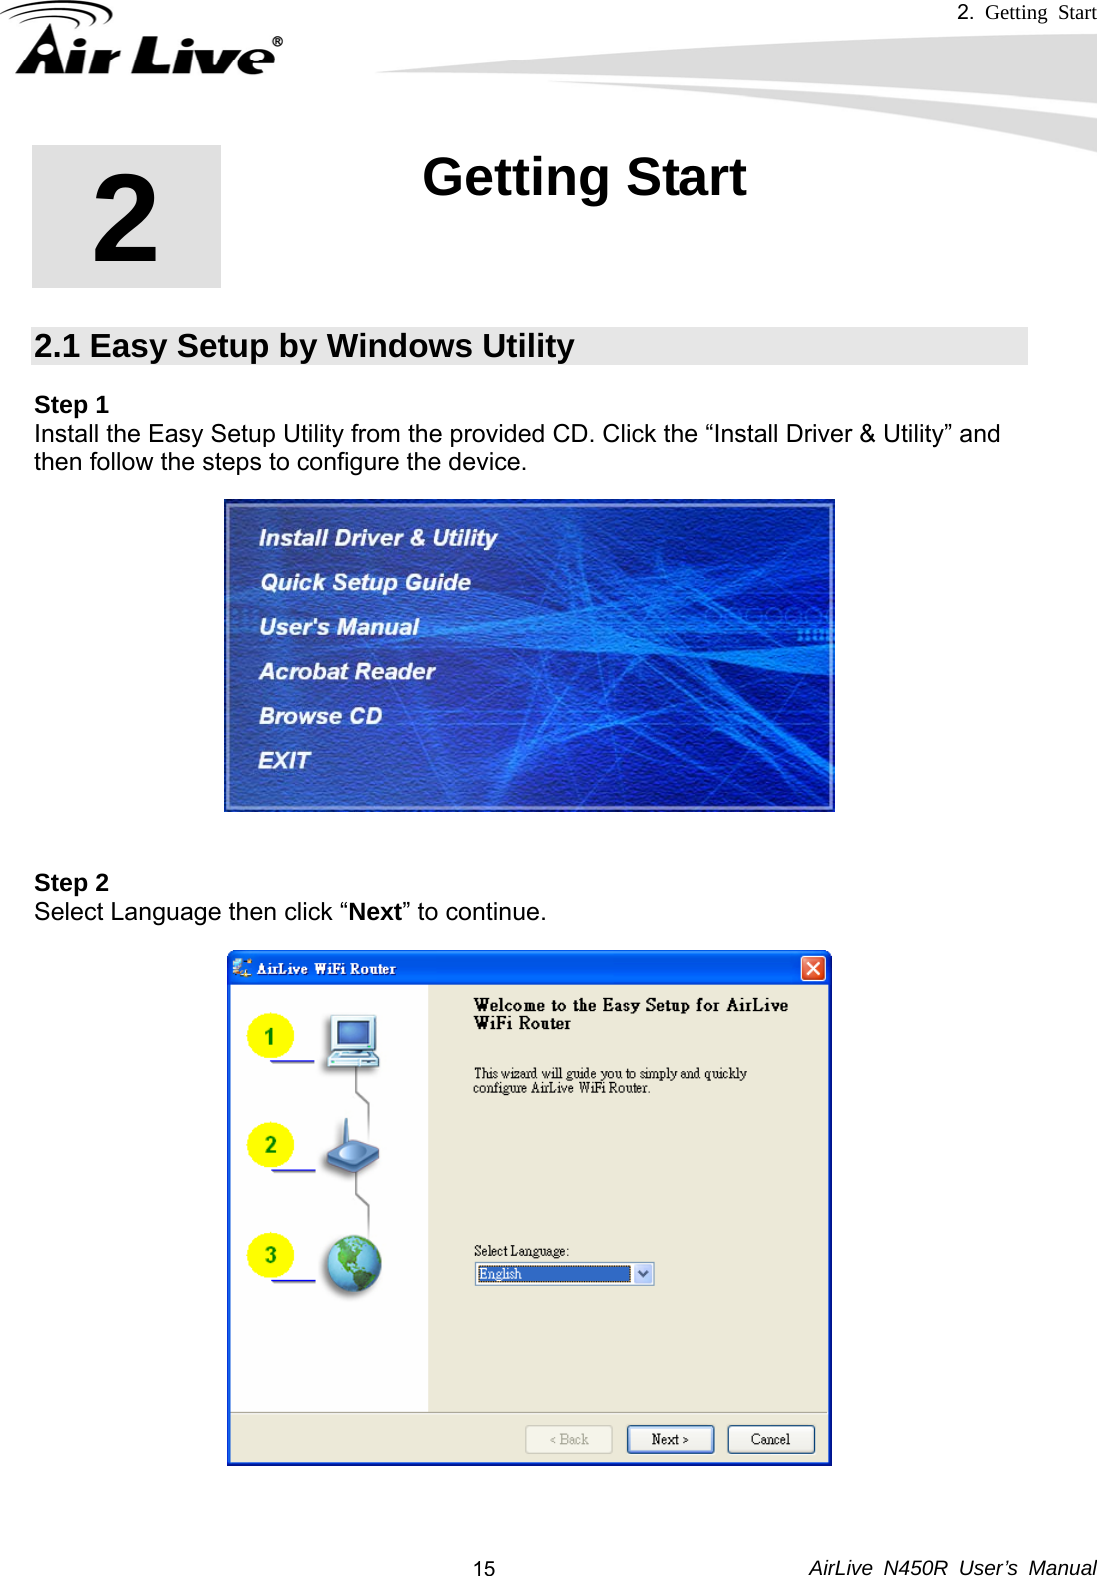 2.  Getting Start     AirLive N450R User’s Manual  152  2. Getting Start 2.1 Easy Setup by Windows Utility Step 1 Install the Easy Setup Utility from the provided CD. Click the “Install Driver &amp; Utility” and then follow the steps to configure the device.   Step 2  Select Language then click “Next” to continue.    